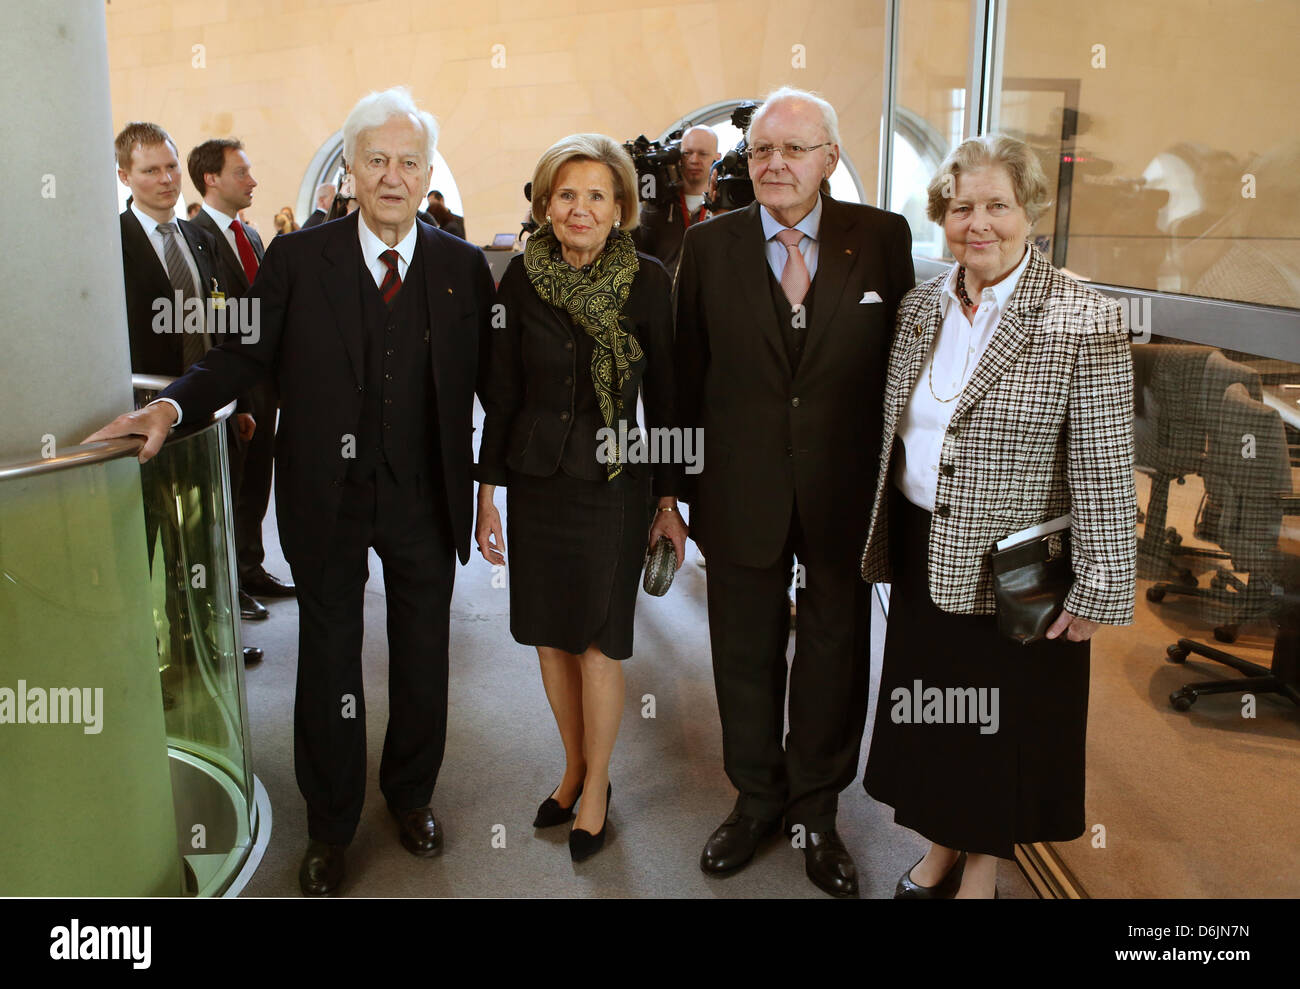 Former German Presidents Richard von Weizsaecker (L) and Roman Herzog and their wives Marianne von Weizsaecker (R) and Alexandra Freifrau von Berlichingen arrive for the swearing-in ceremony of German President Gauck at the Reichstag in Berlin, Germany, 23 March 2012. Gauck received a vast majority of votes from the Federal Assembly. Photo: Michael Kappeler Stock Photo